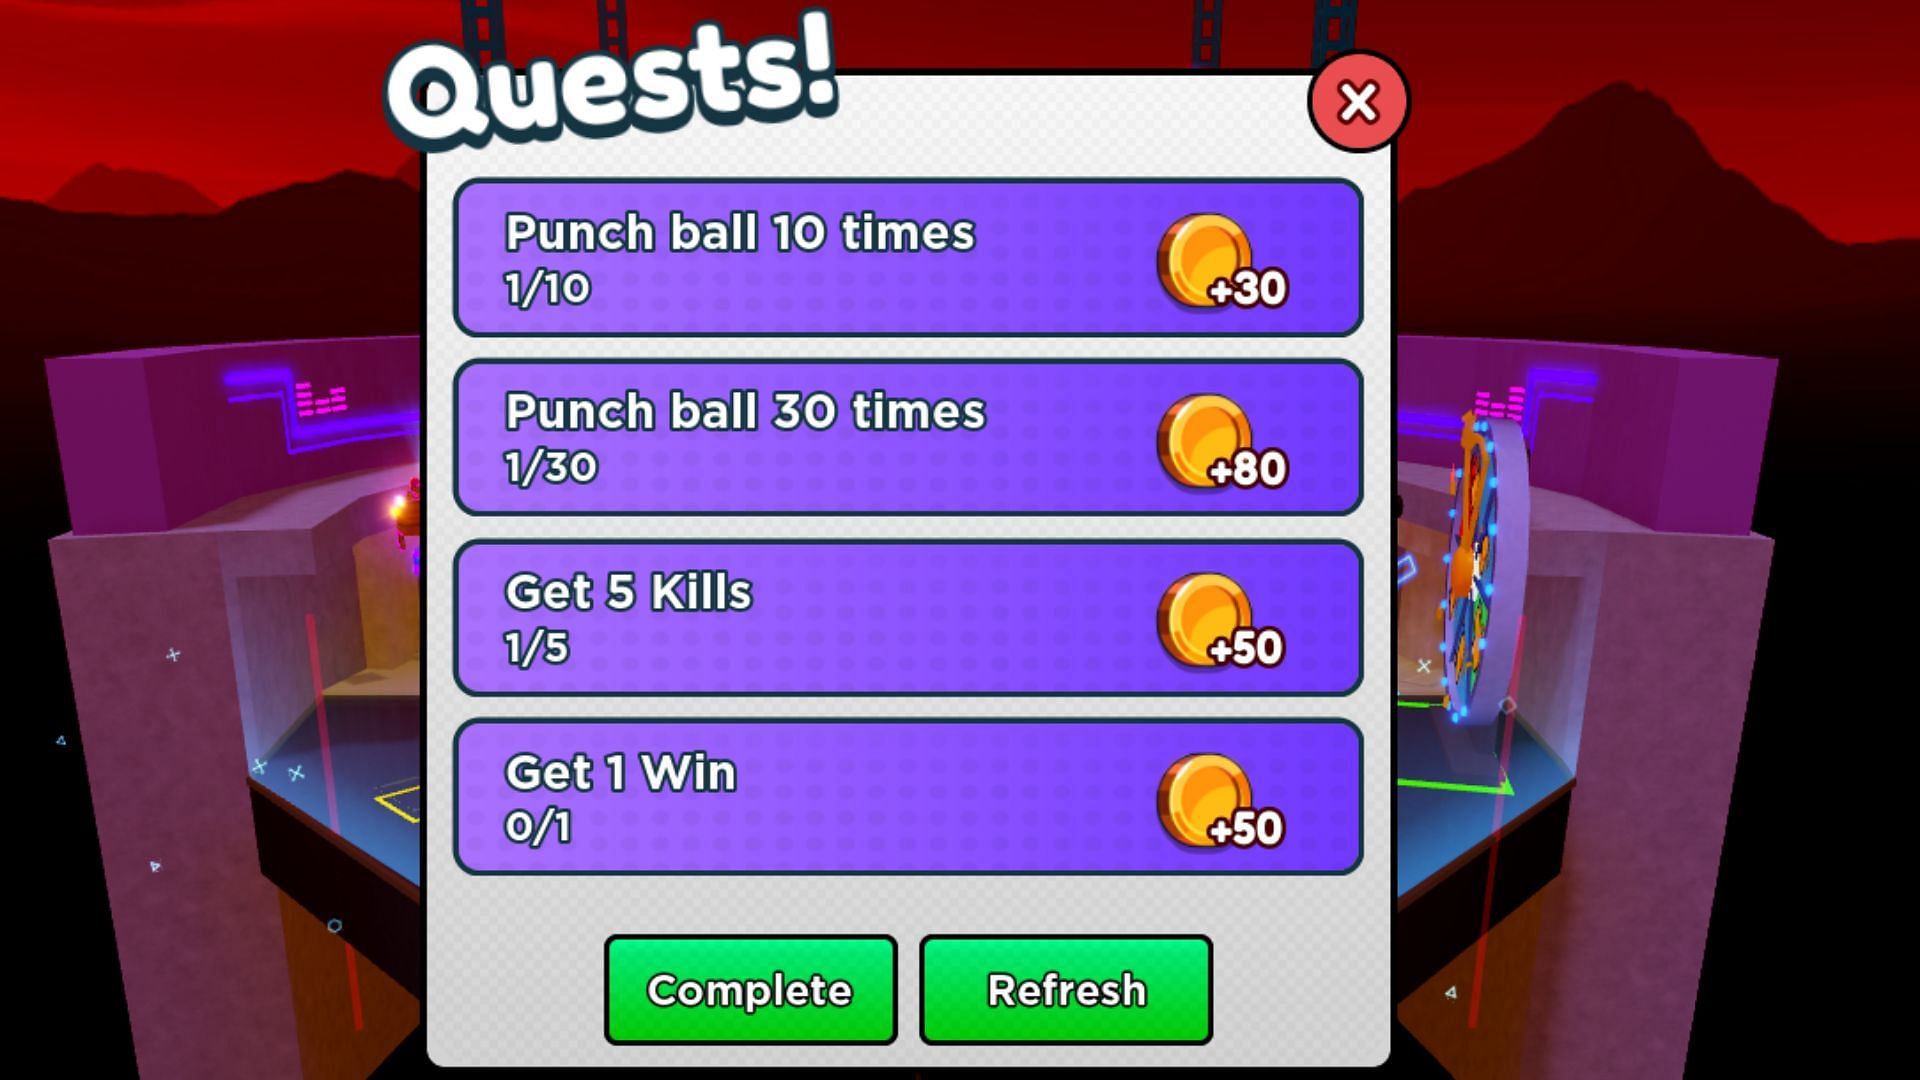 Daily quests in Punch Ball (Image via Roblox)